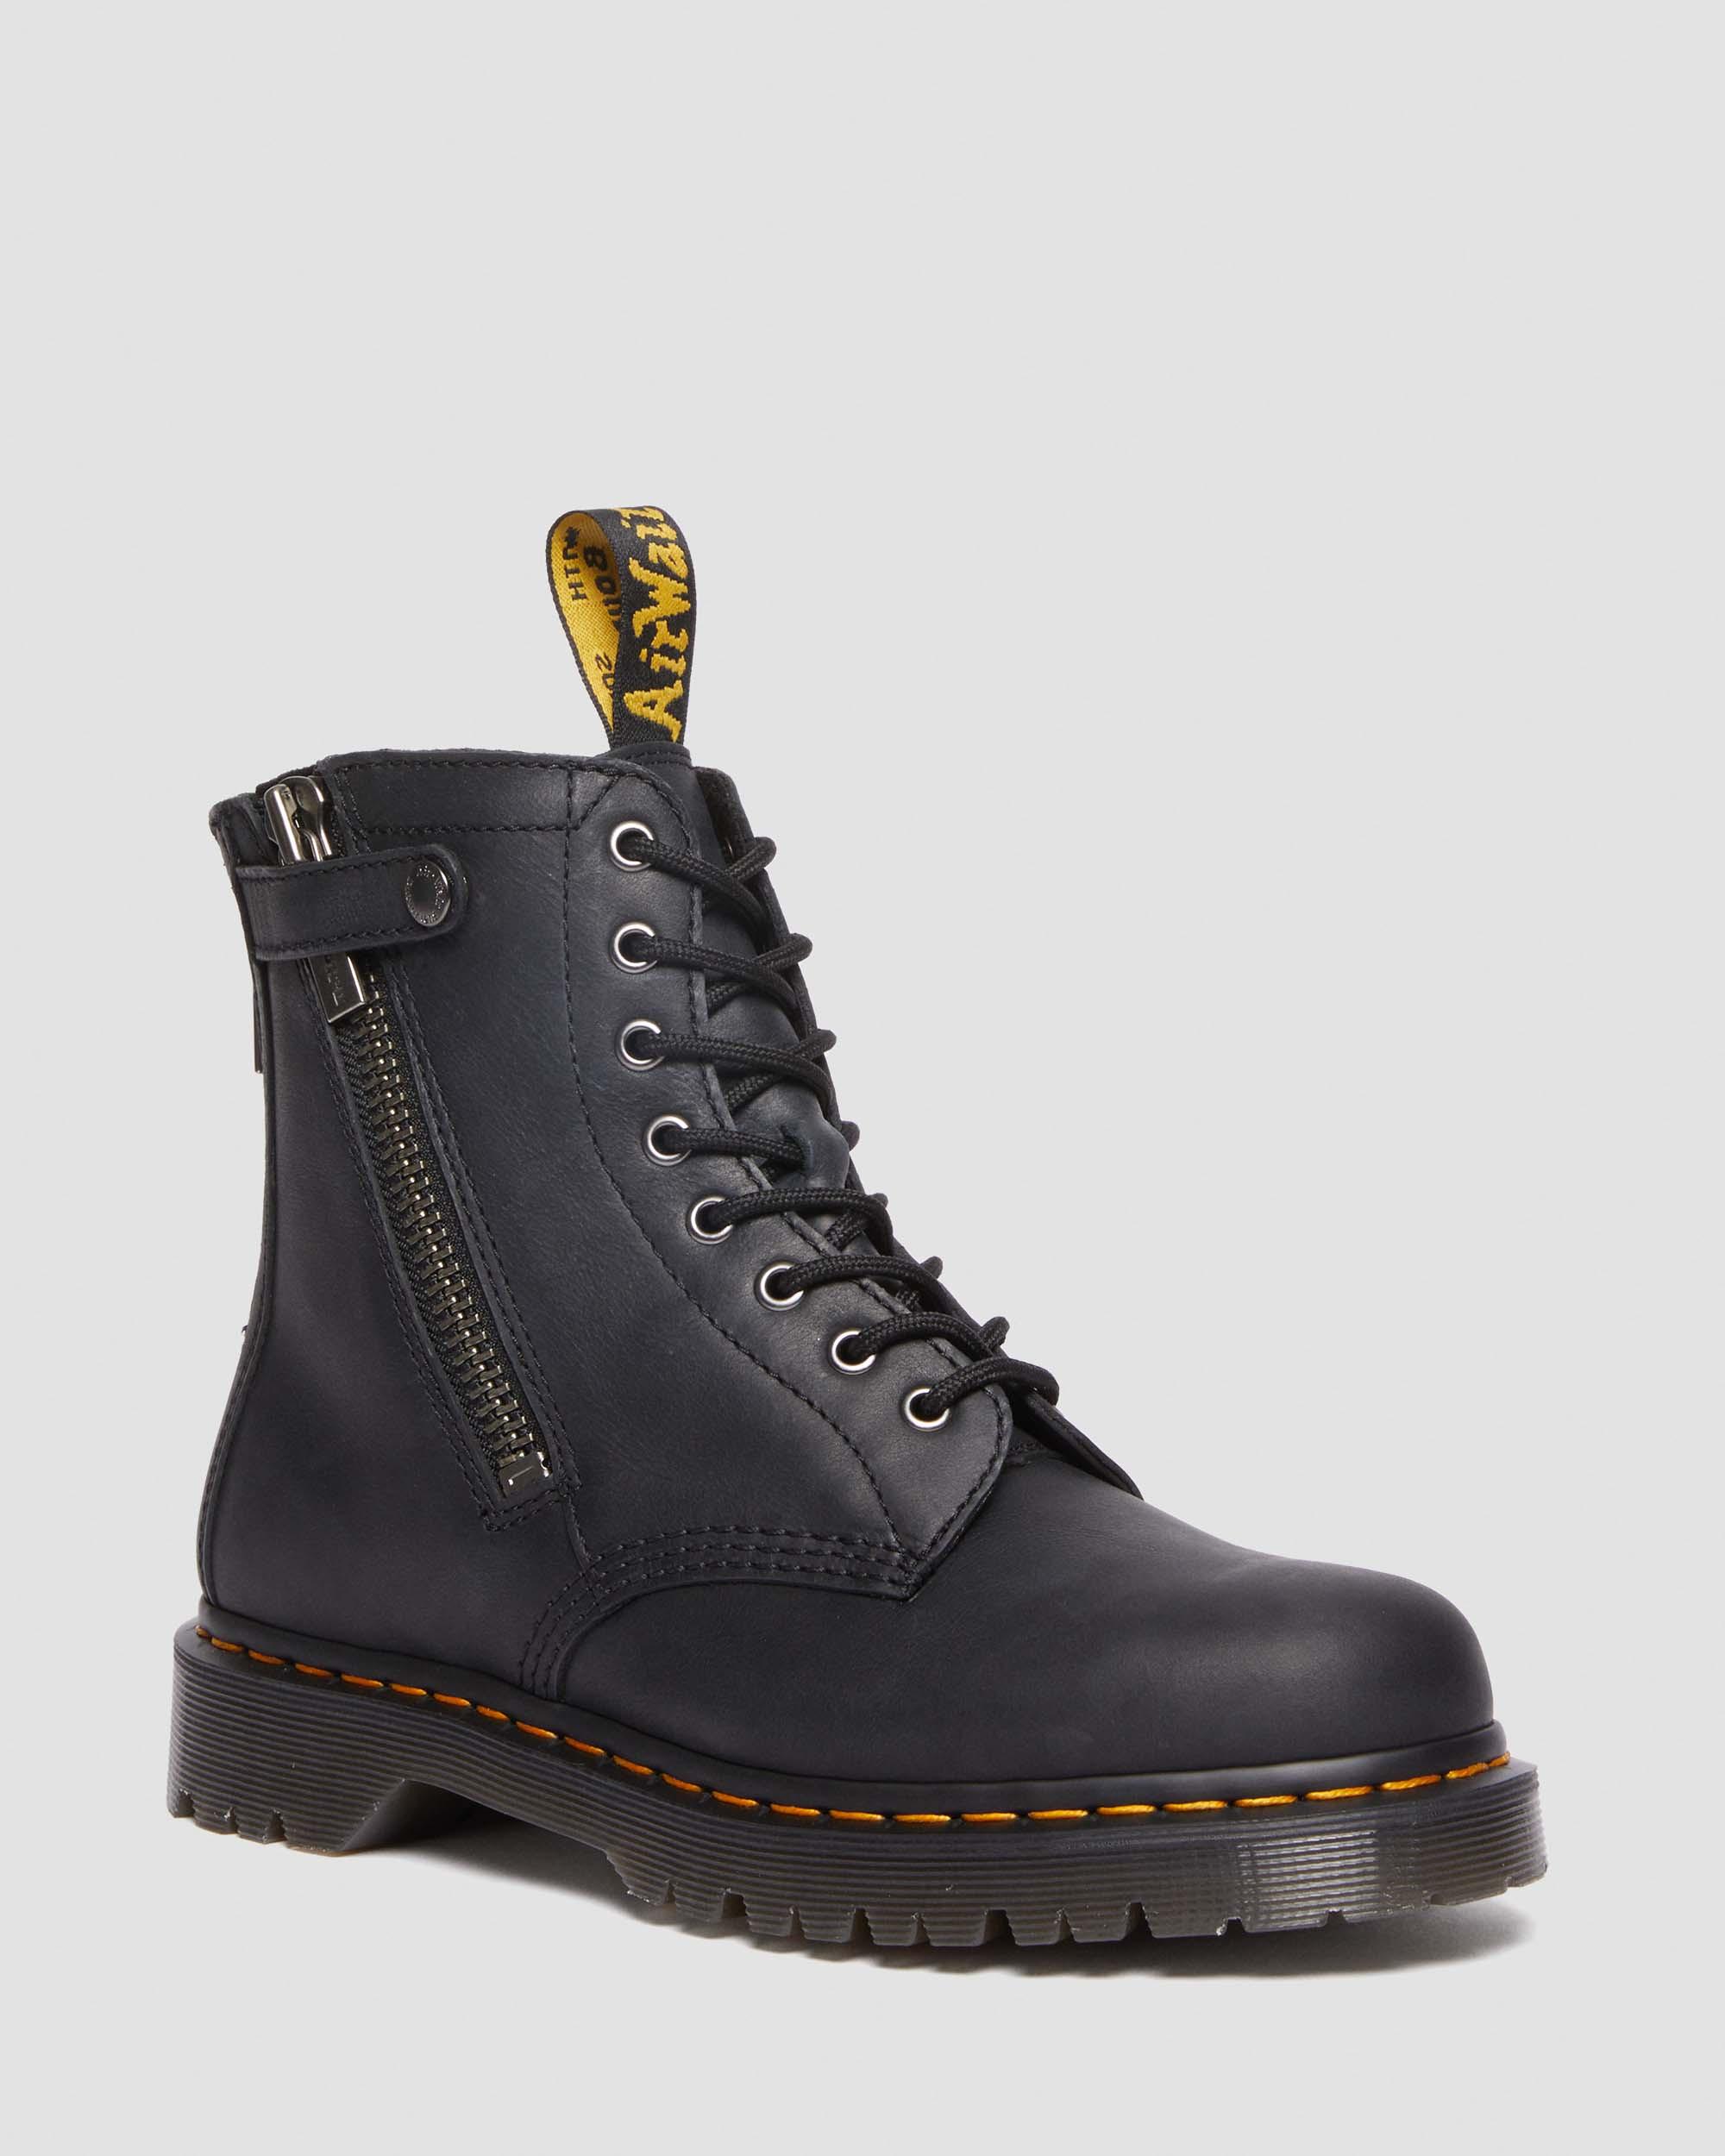 Dr martens 1460 MONO SMOOTH LEATHER LACE UP BOOTS Size 9 Women 8 Men